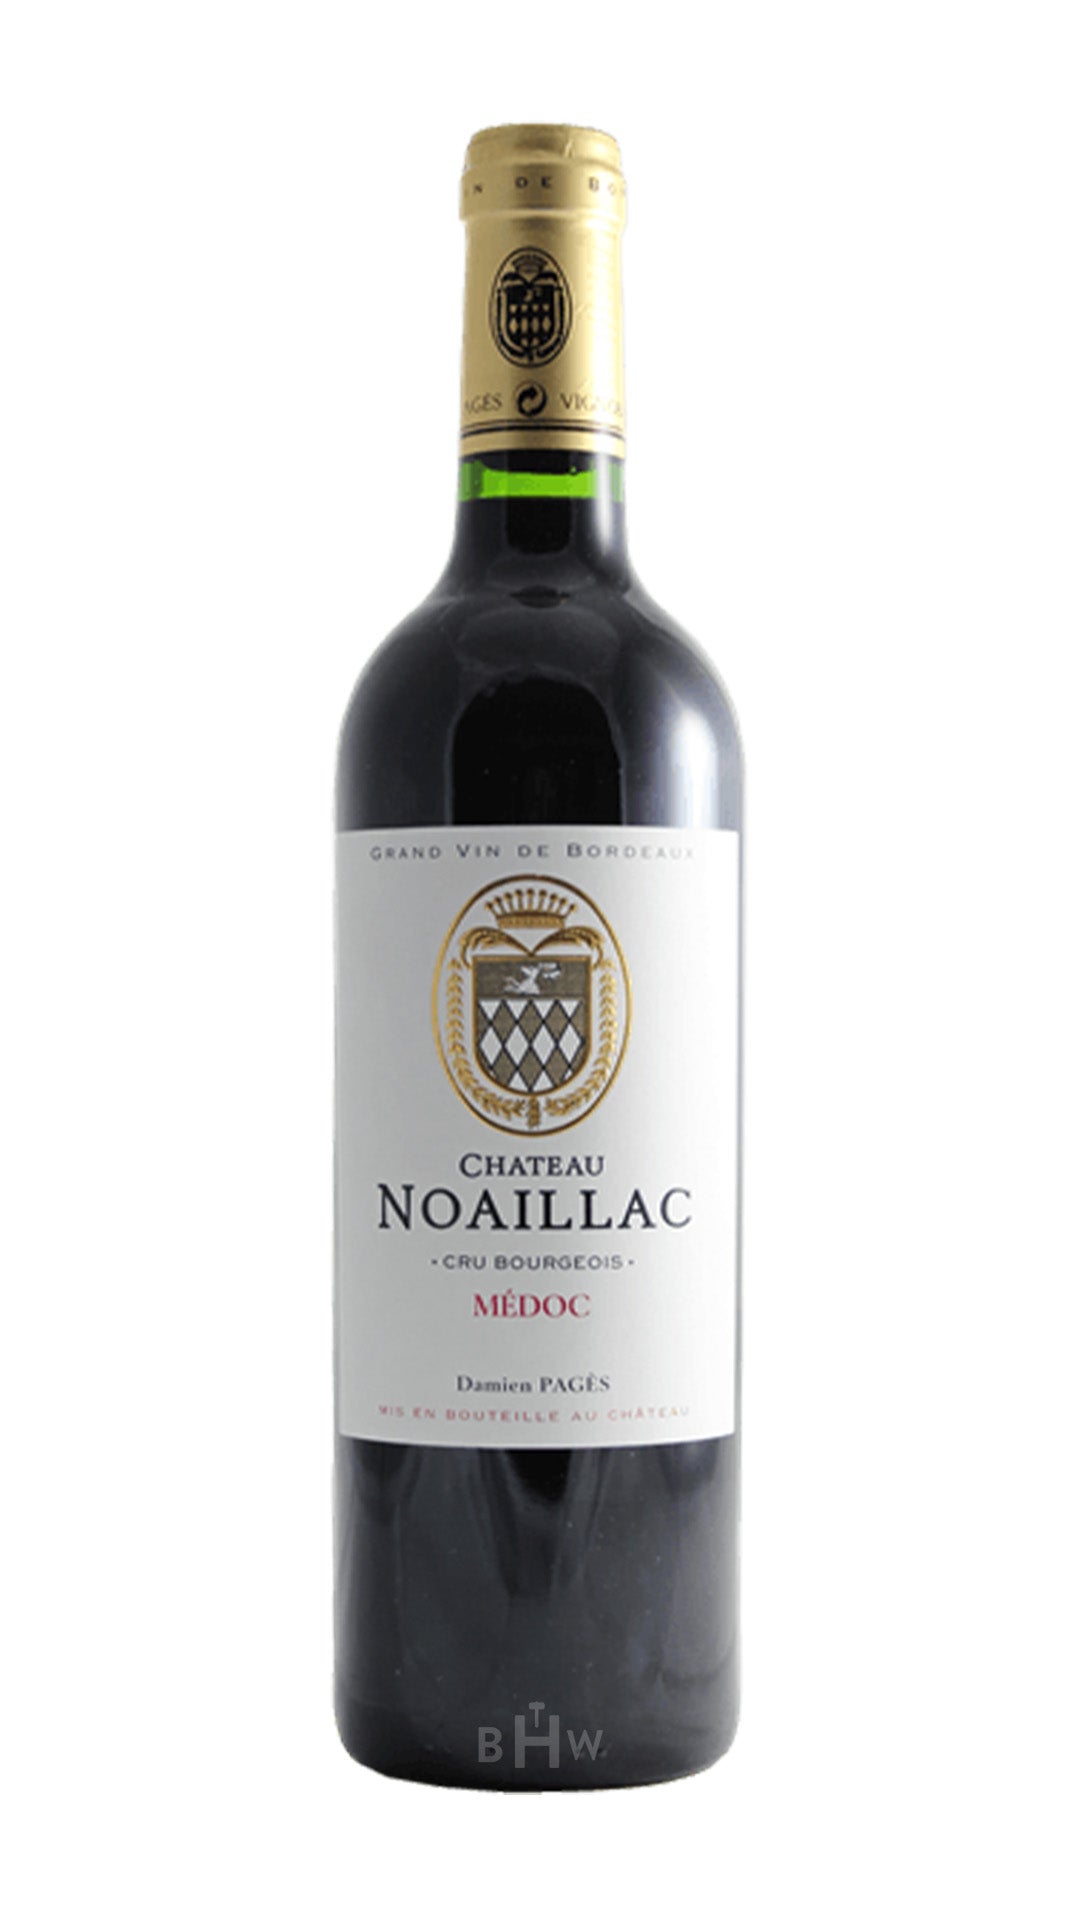 Bourgeois Chateau Medoc 2018 Noaillac Cru Superieur